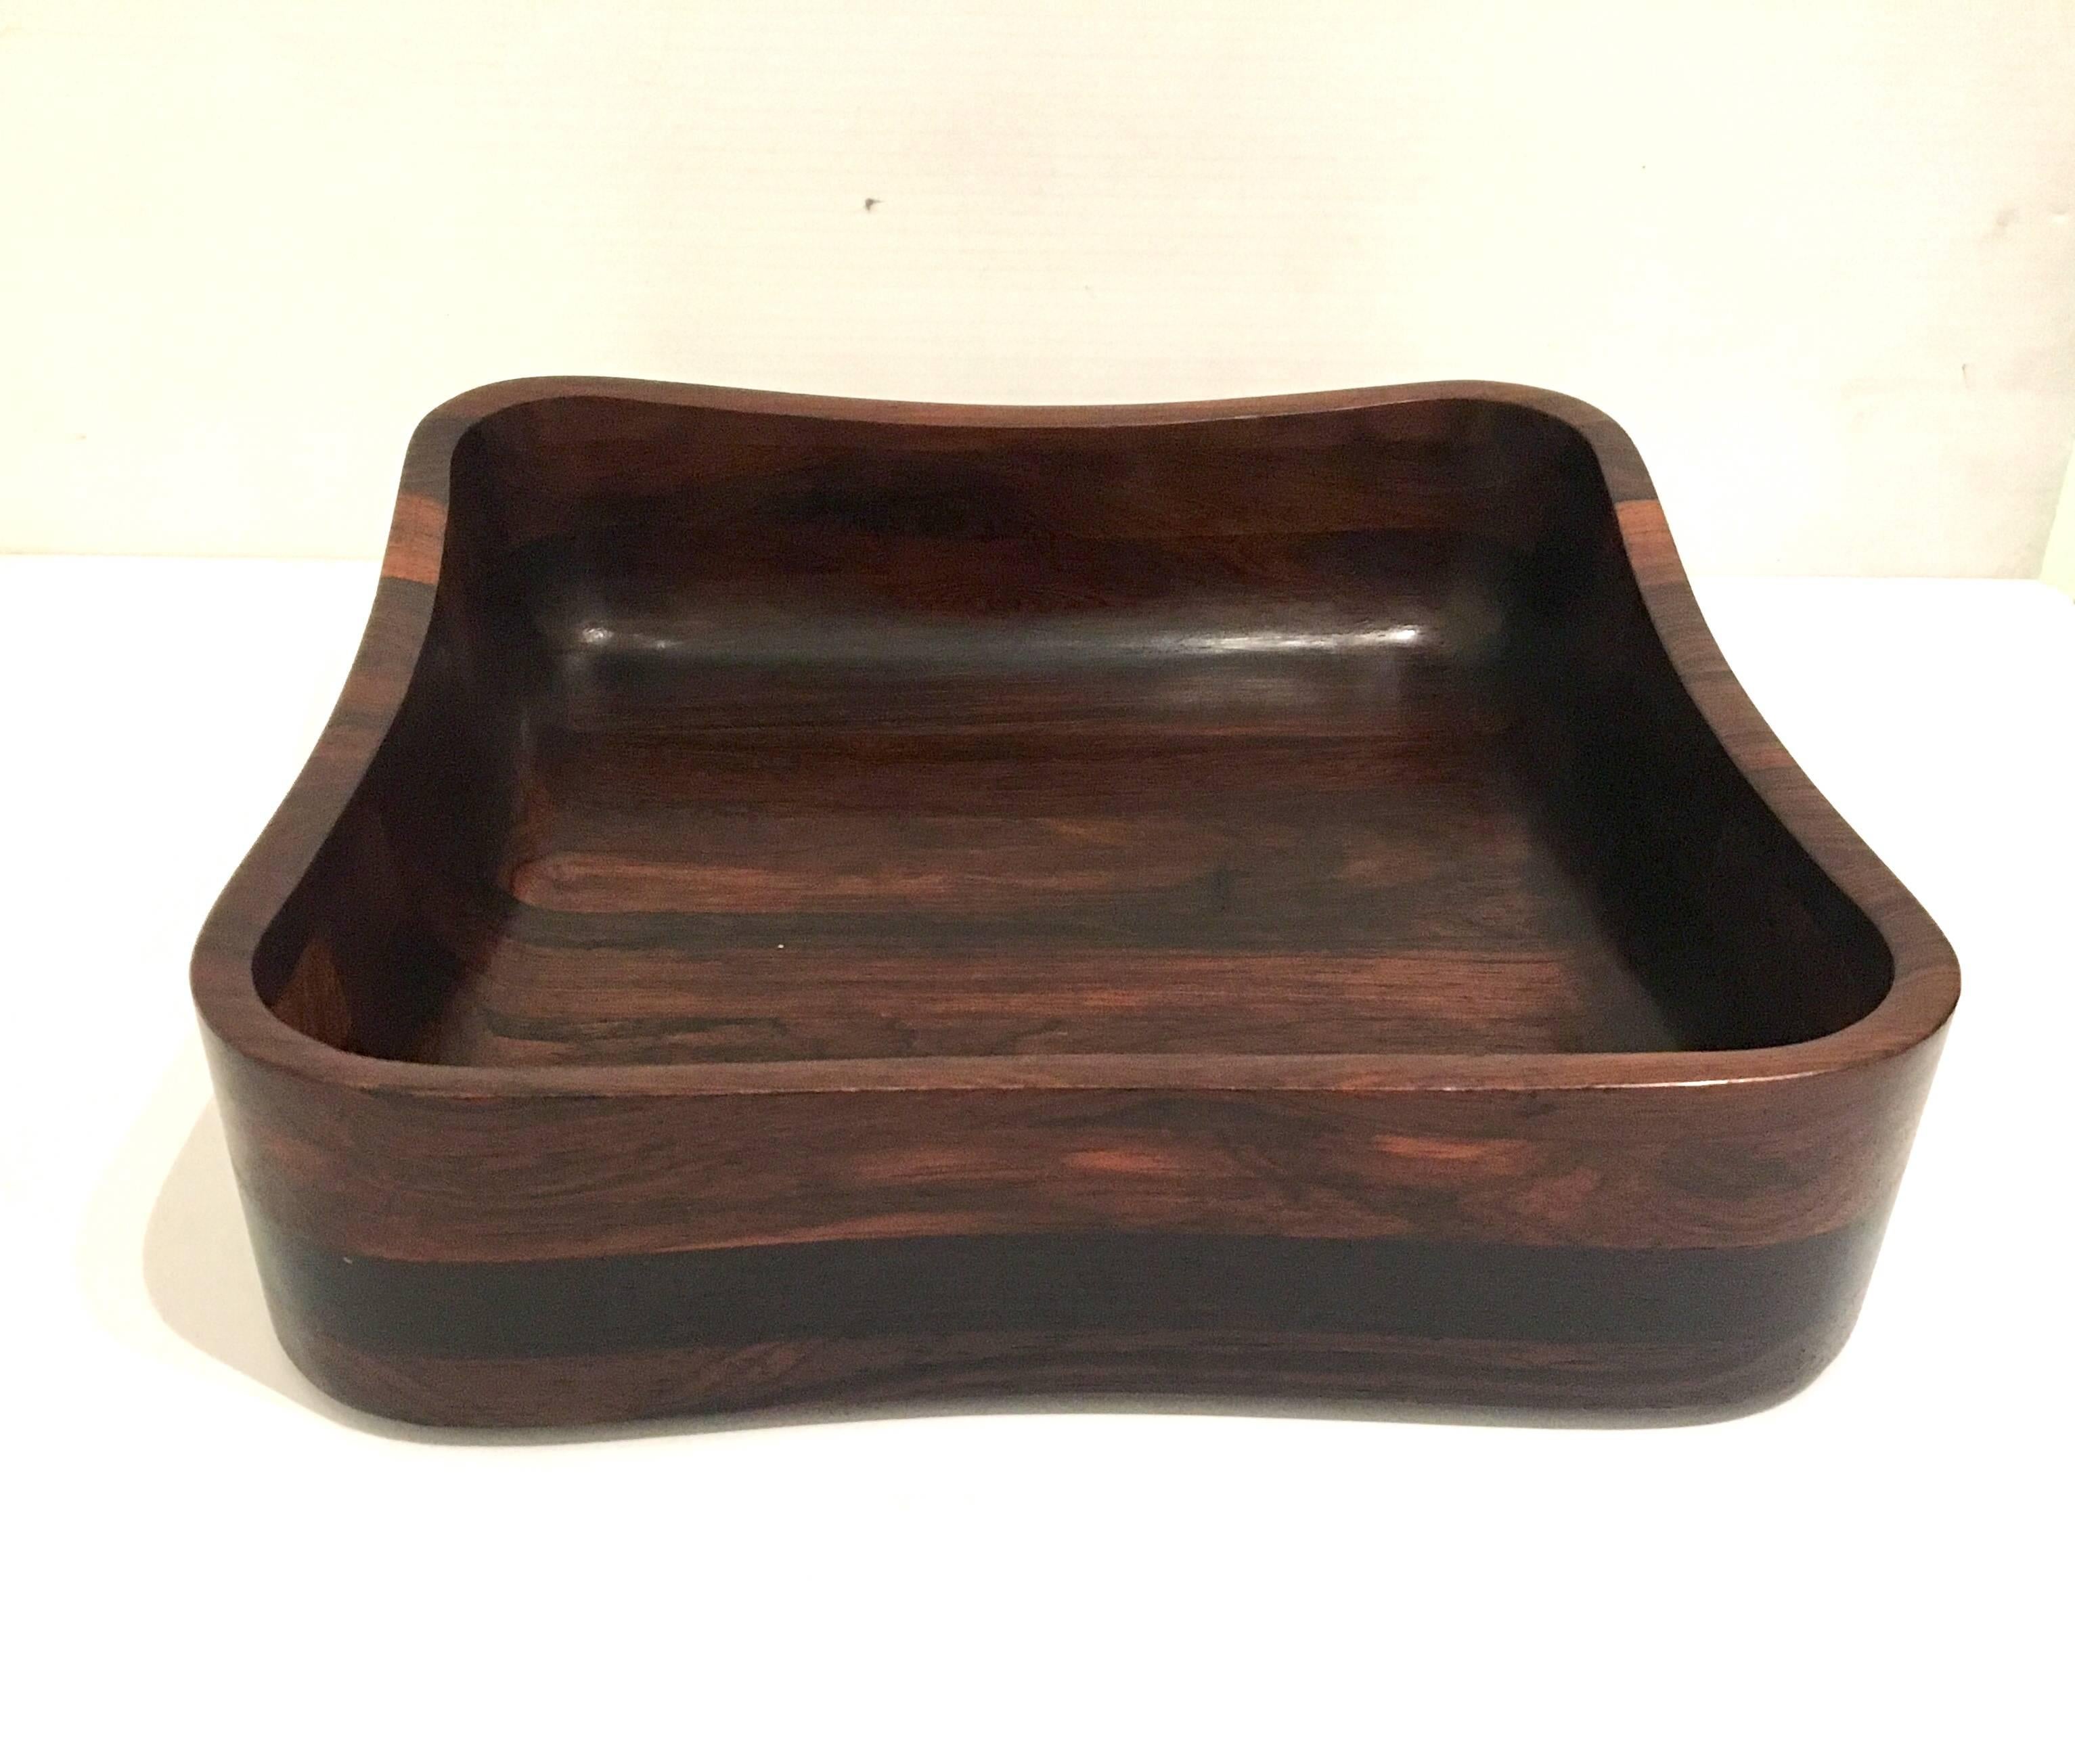 Beautiful and rare set of five pieces a salad bowl and four small bowls, solid rosewood sculpted wood Made in Denmark, circa 1950s, each small bowl its 6